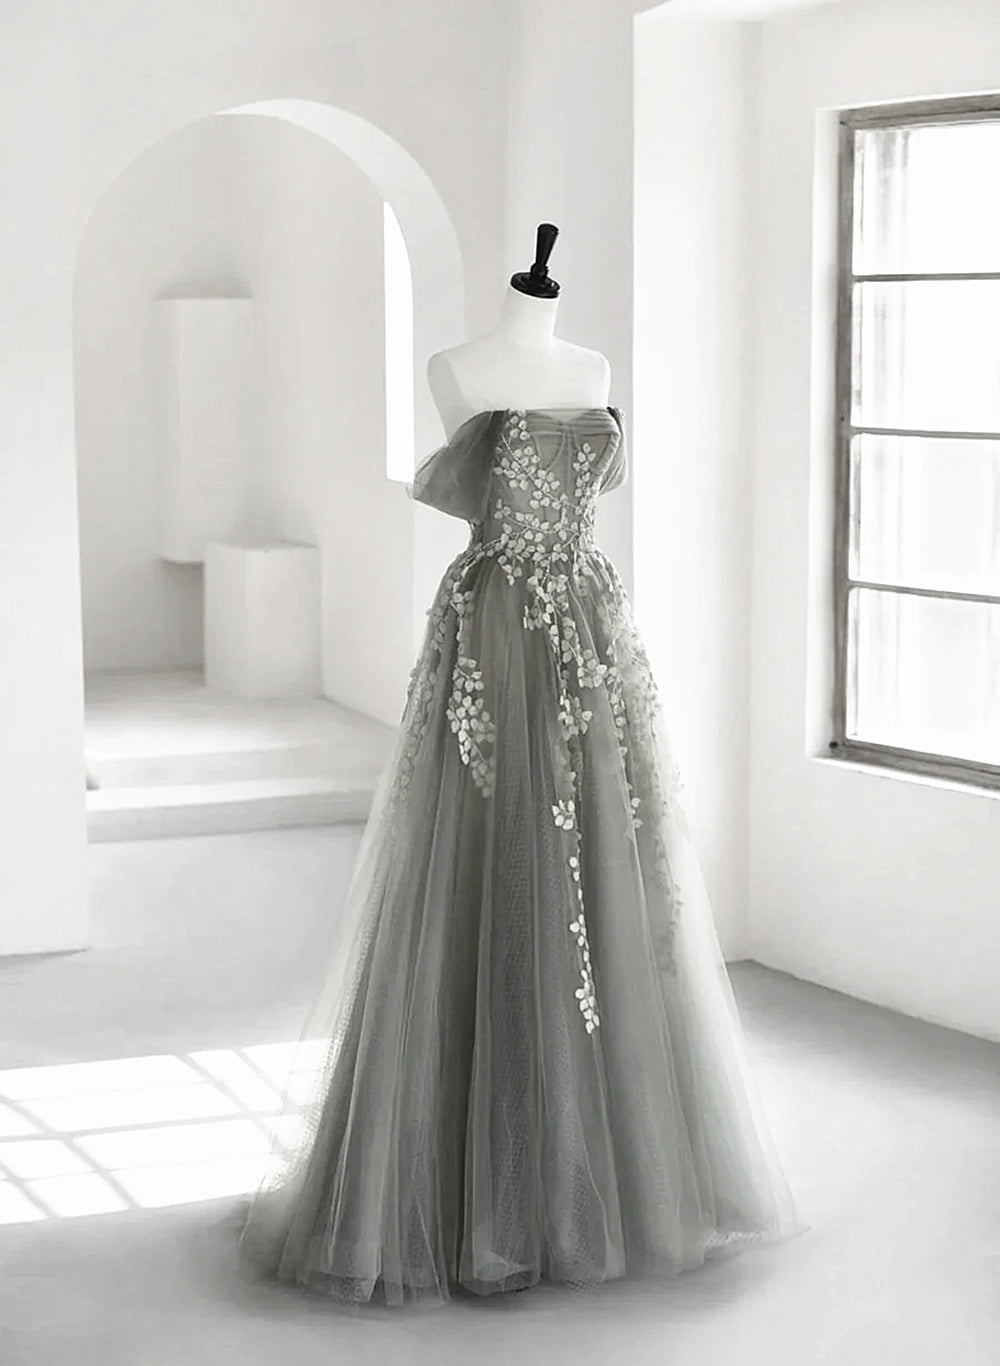 Bridesmaid Dresses Convertible, Light Grey A-line Tulle Long Formal Dress, Grey Tulle with Lace Applique Party Dress